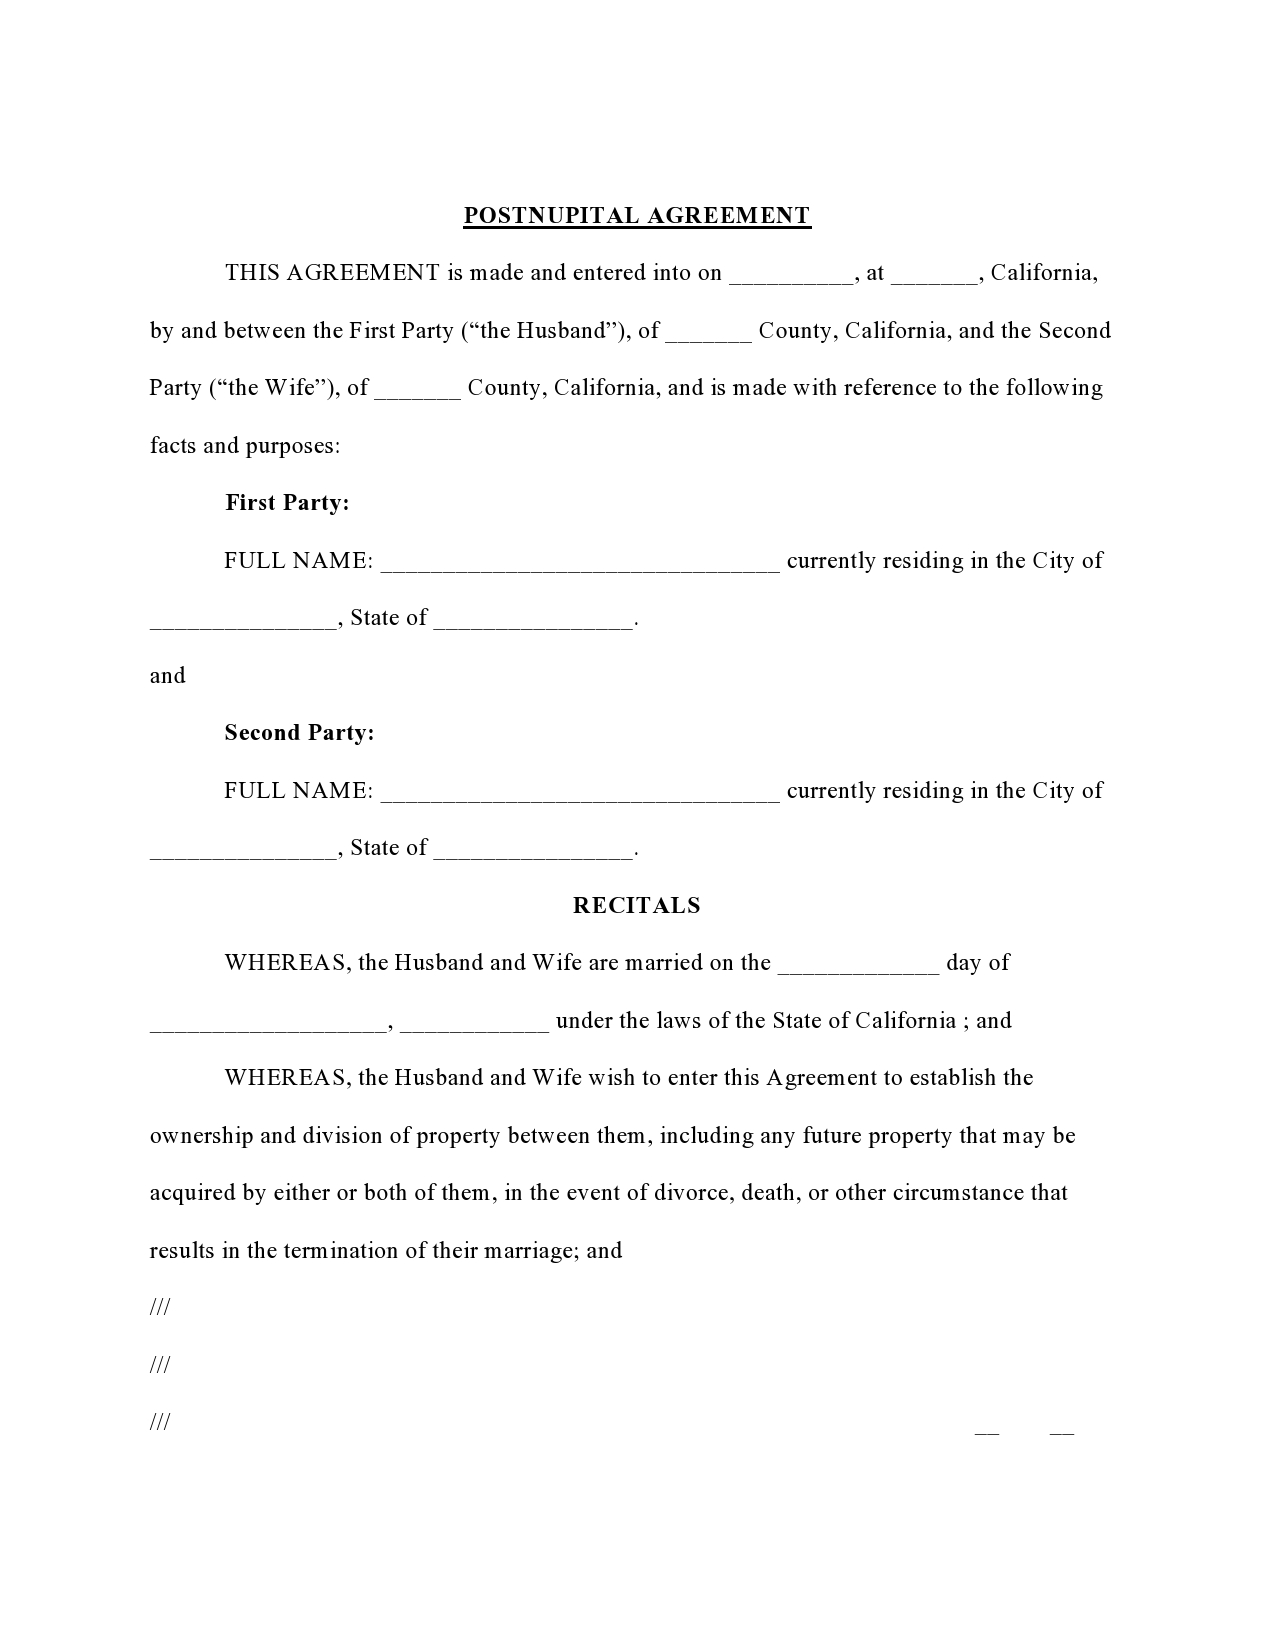 Free postnuptial agreement template 25